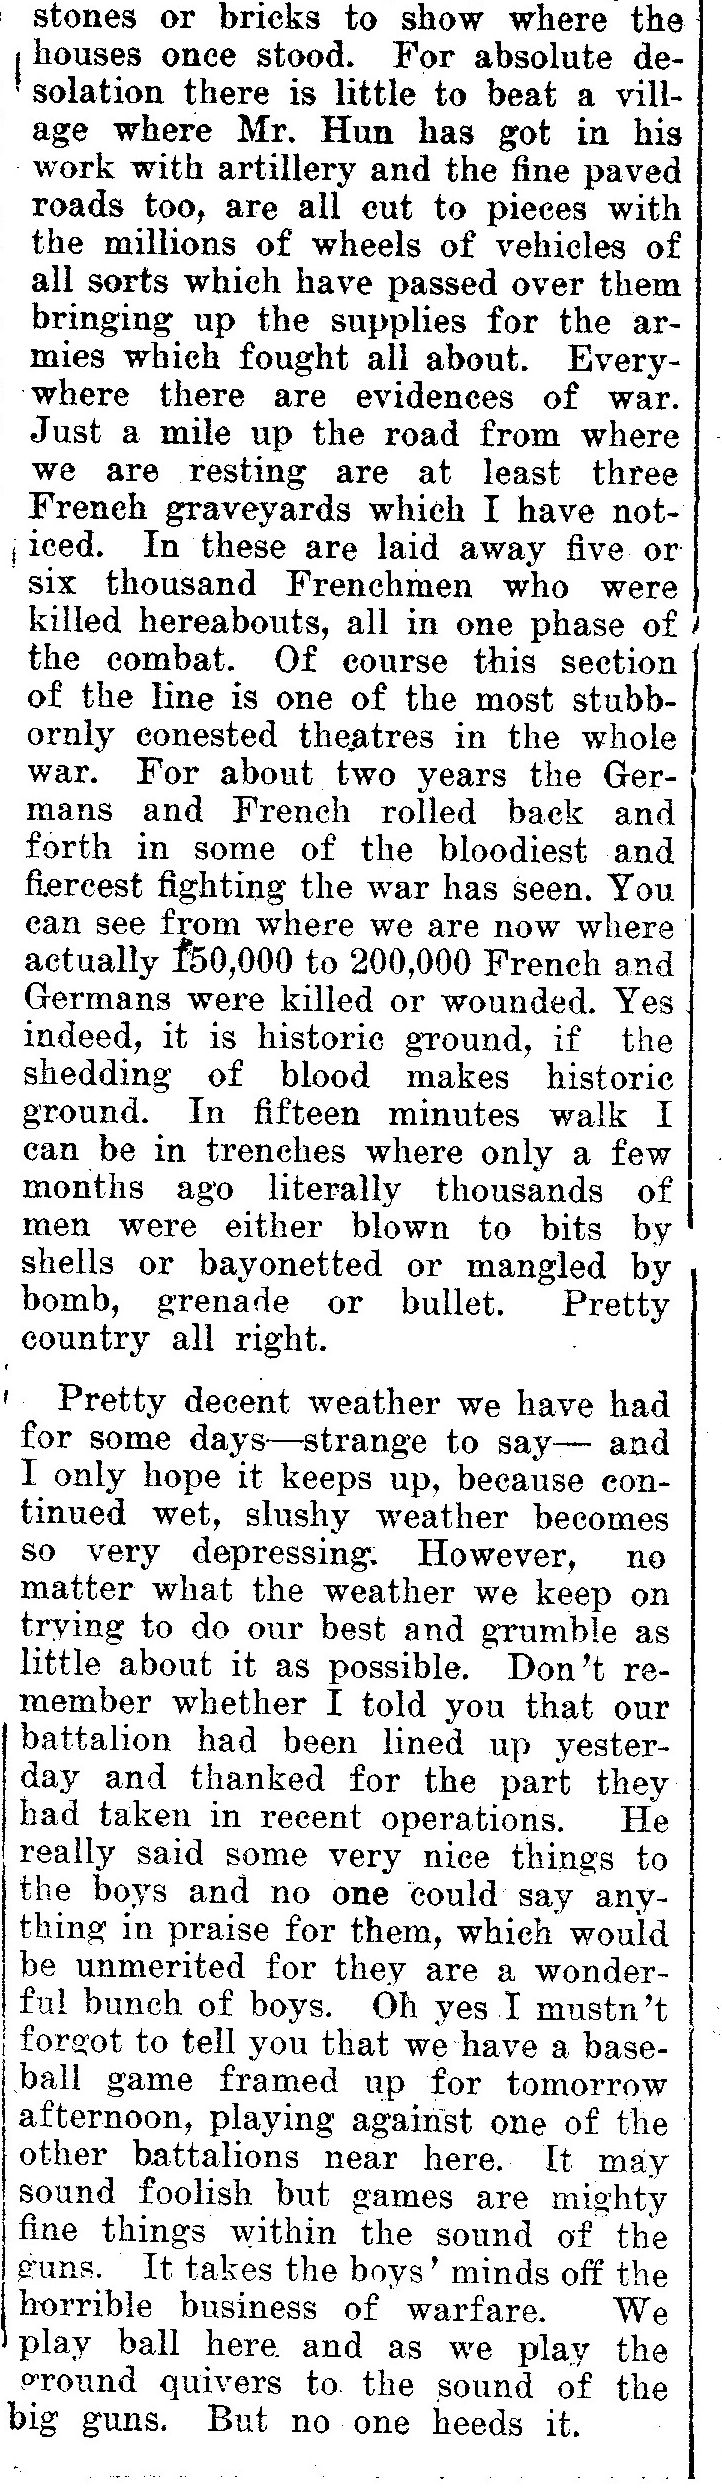 The Chesley Enterprise, June 14, 1917 (2 of 2)